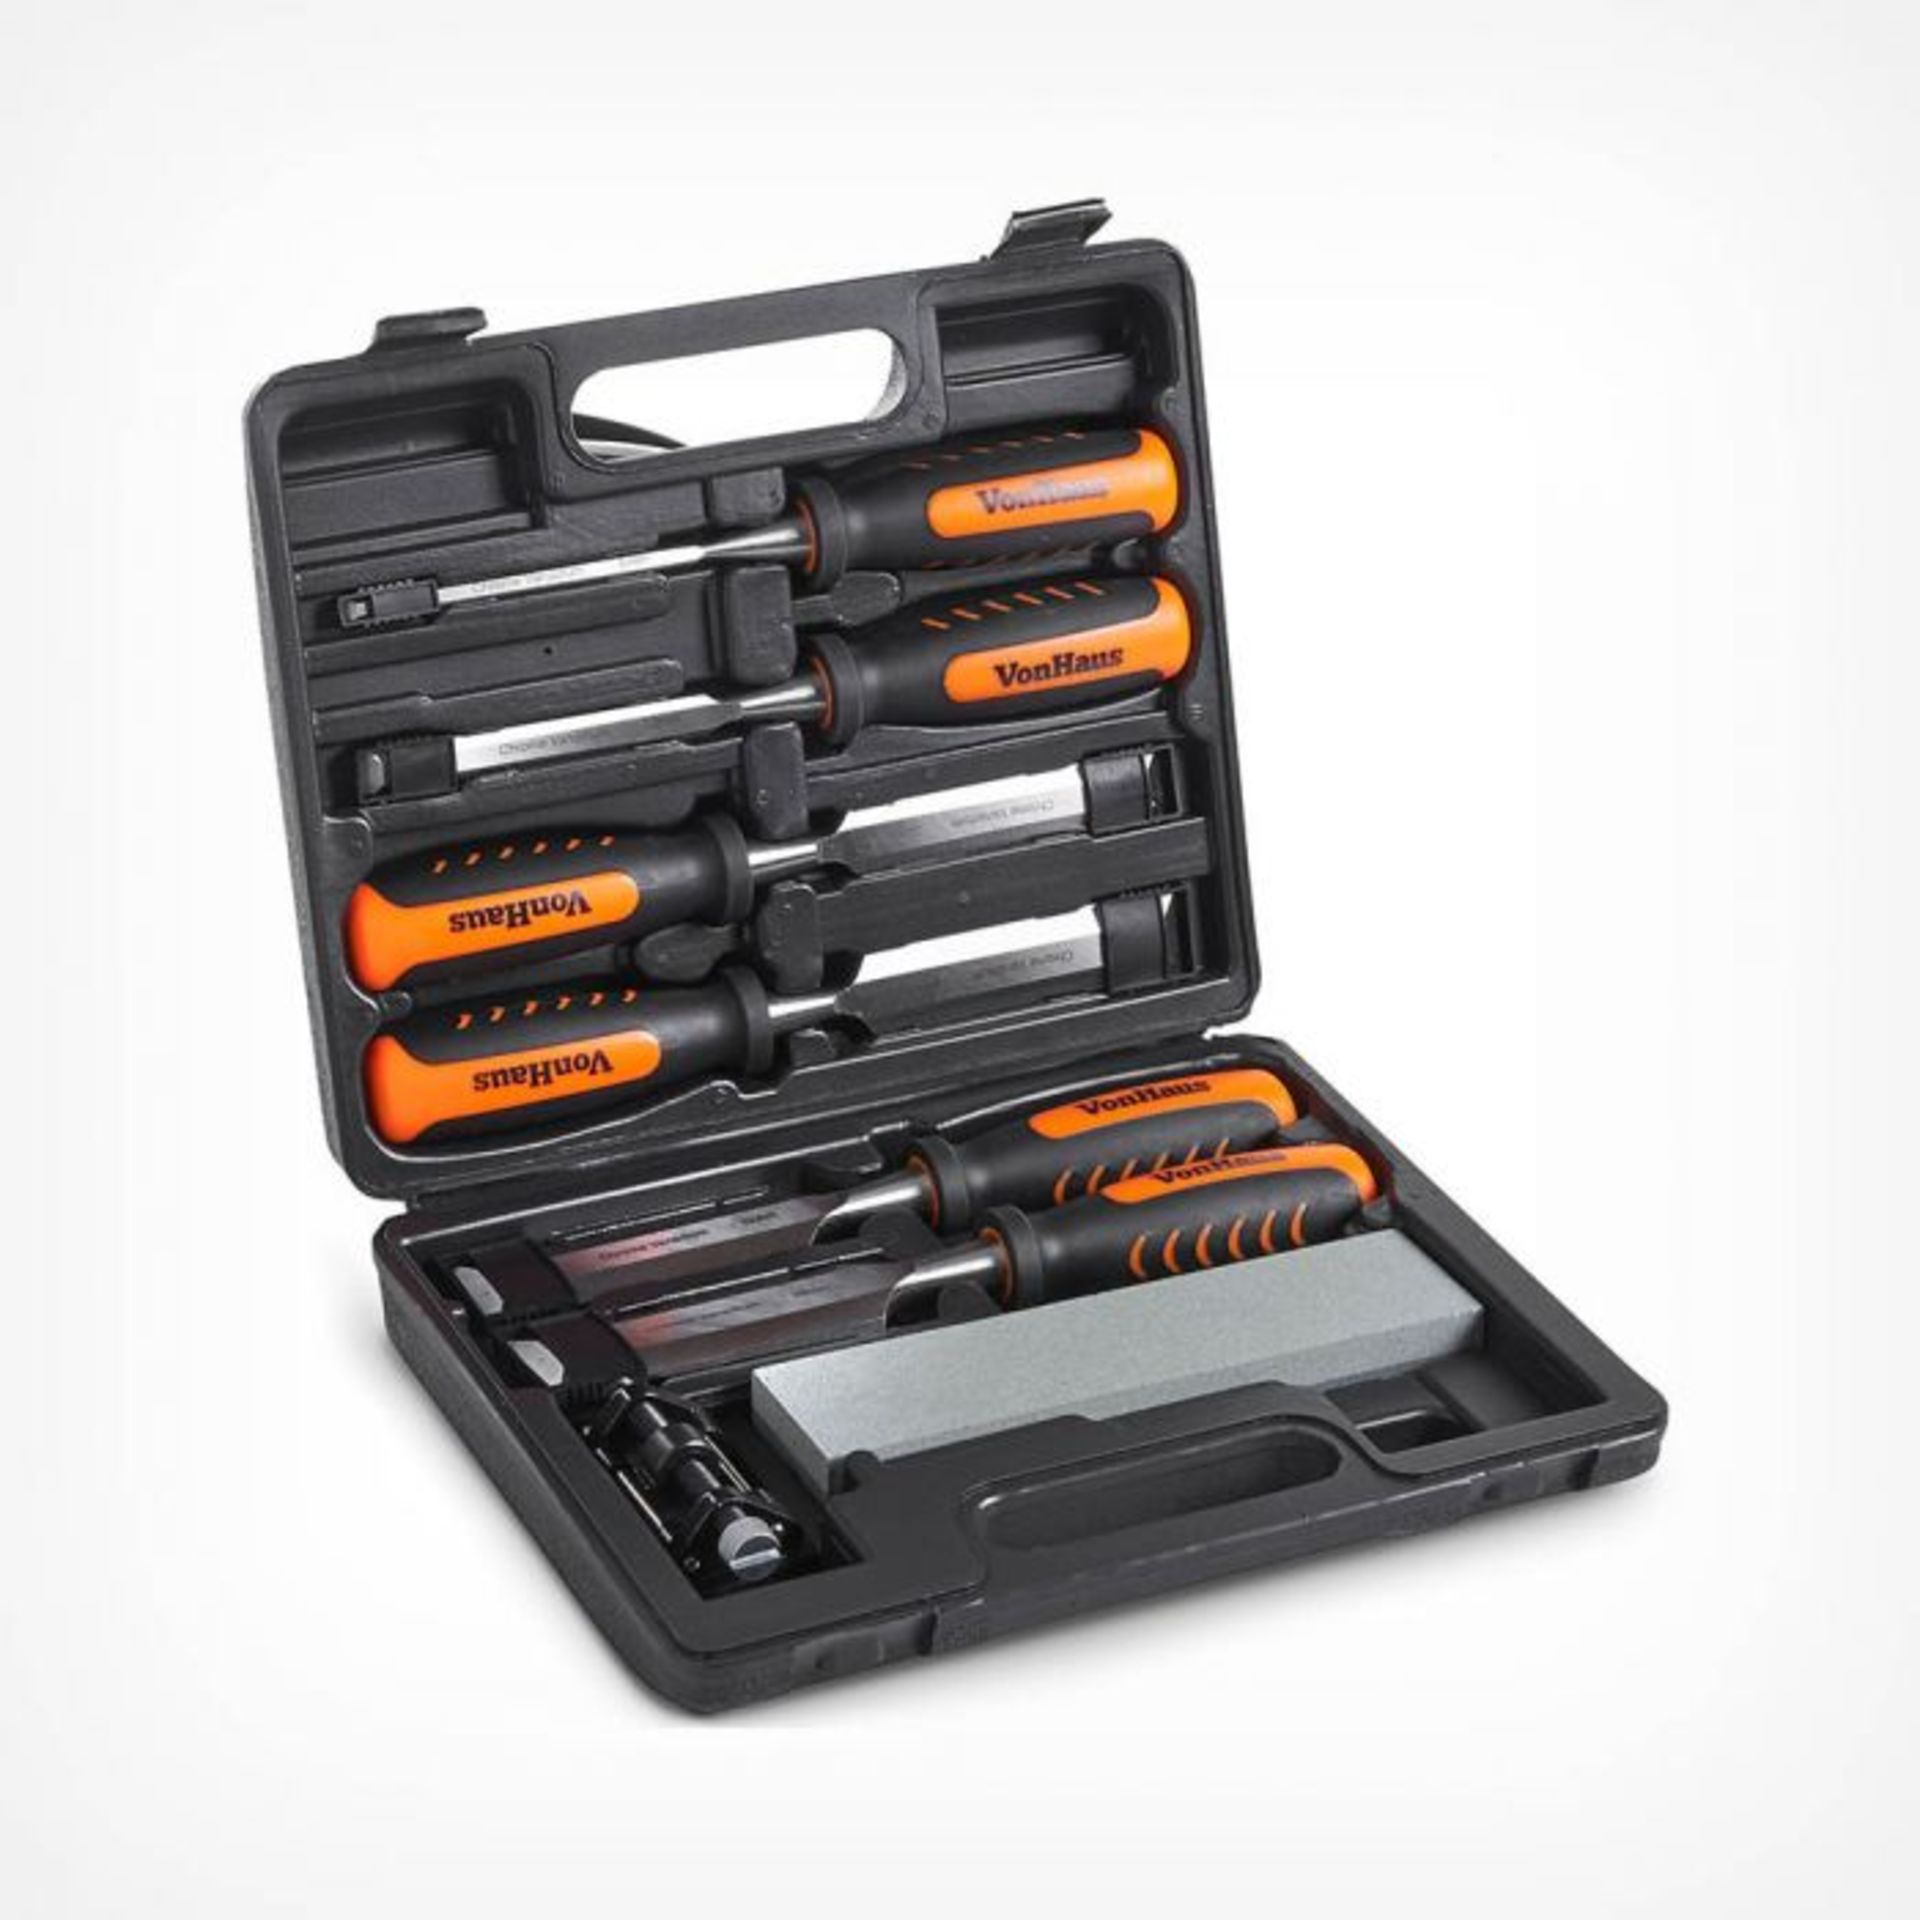 8 Piece Wood Chisel Set. The luxury 8 Piece Chisel Set is perfect for a range of woodworking tasks